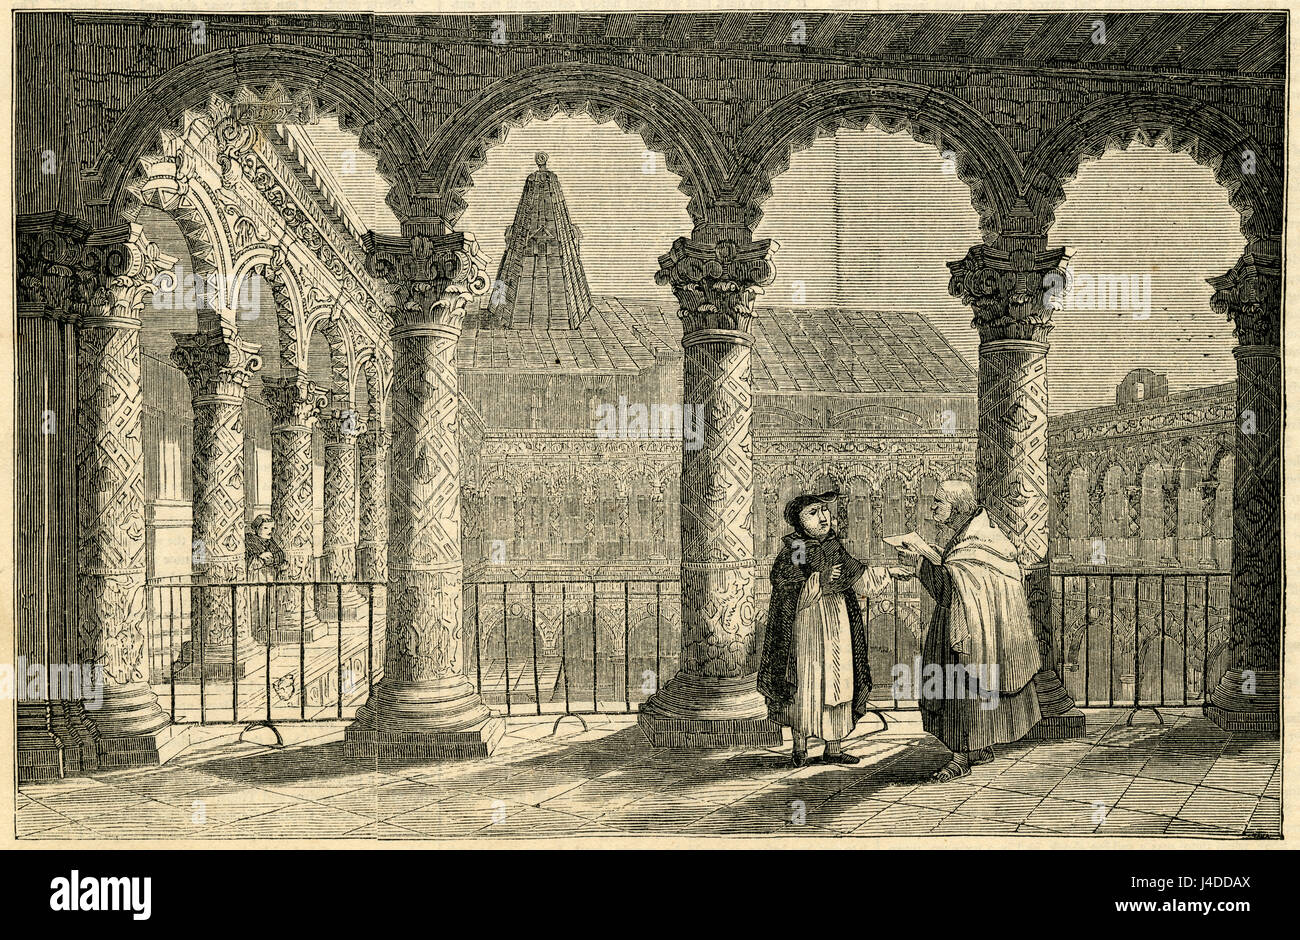 Antique 1854 engraving, View of the Convent of La Merced in Mexico. The La Merced Cloister is all that is left of a monastery complex built in the late 16th and early 17th century by the Mercedarian order. SOURCE: ORIGINAL ENGRAVING. Stock Photo